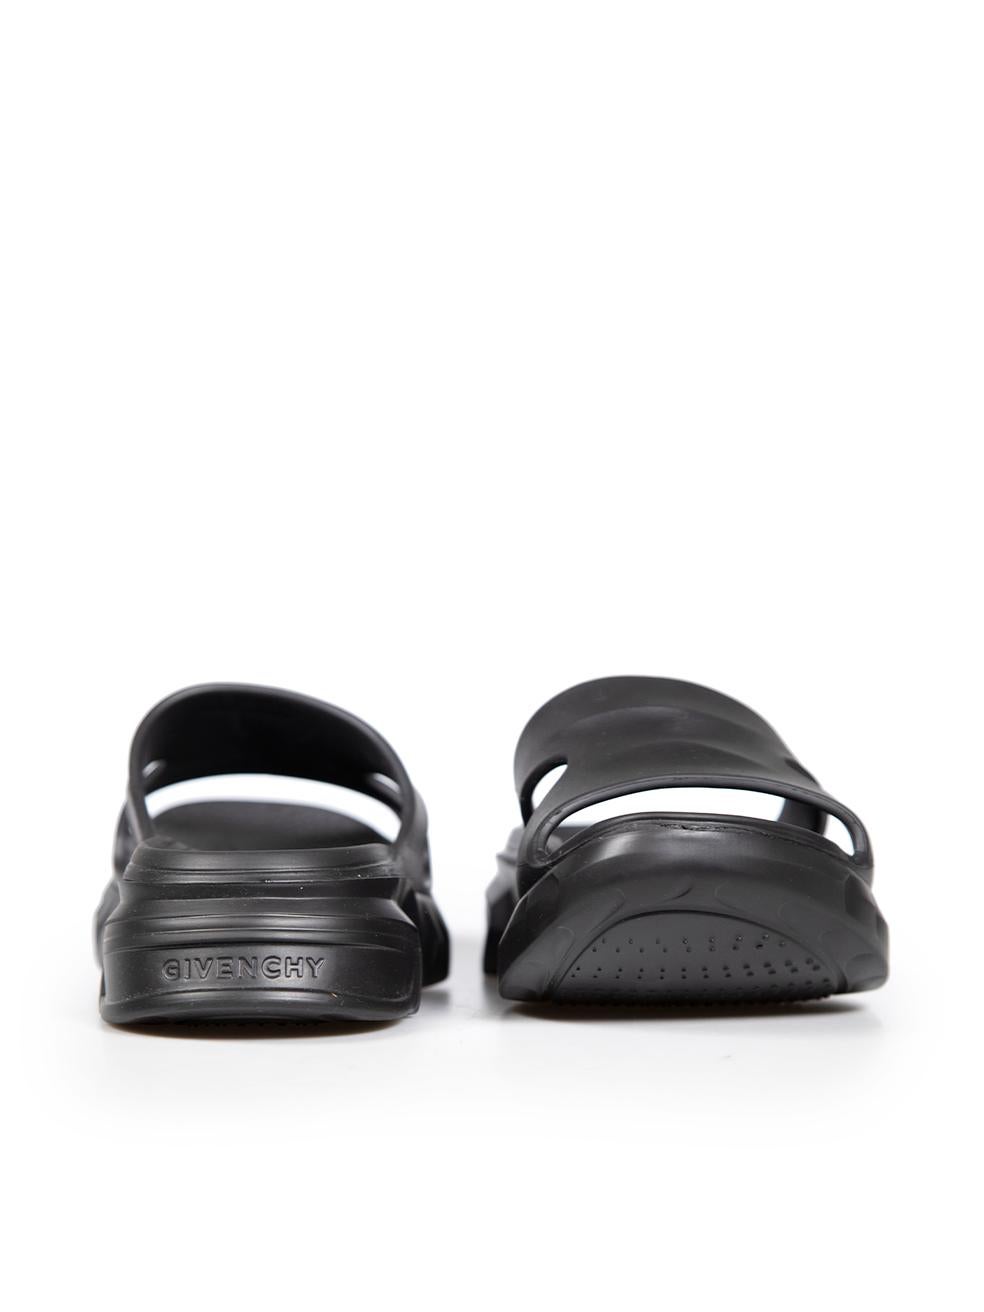 Givenchy Black Rubber Marshmallow Slides Size IT 39 In New Condition For Sale In London, GB